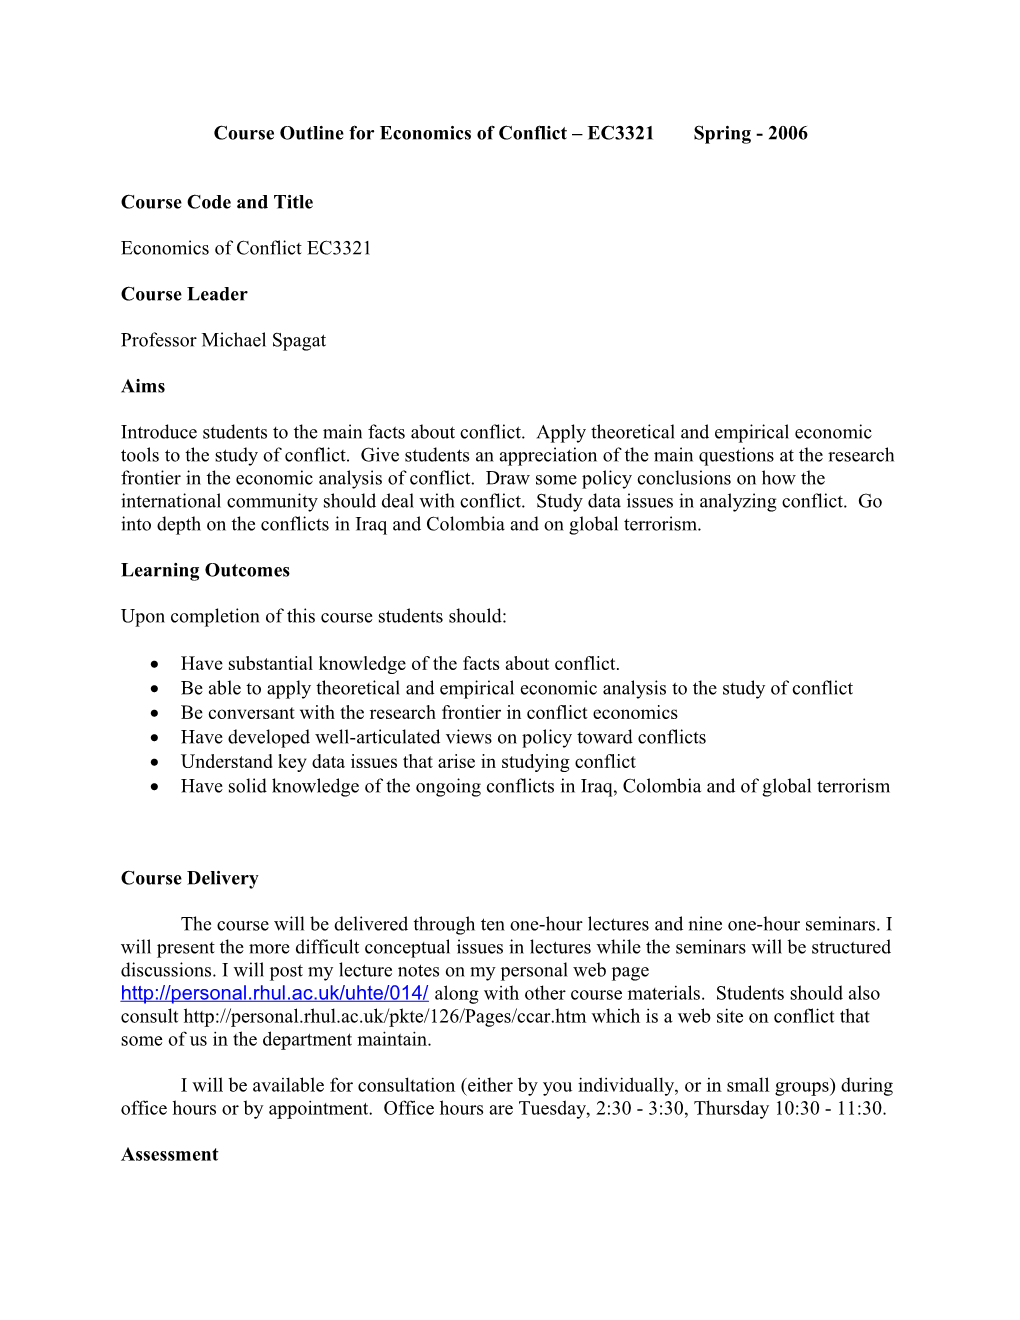 Course Outline for Economics of Conflict Ec3321spring - 2006